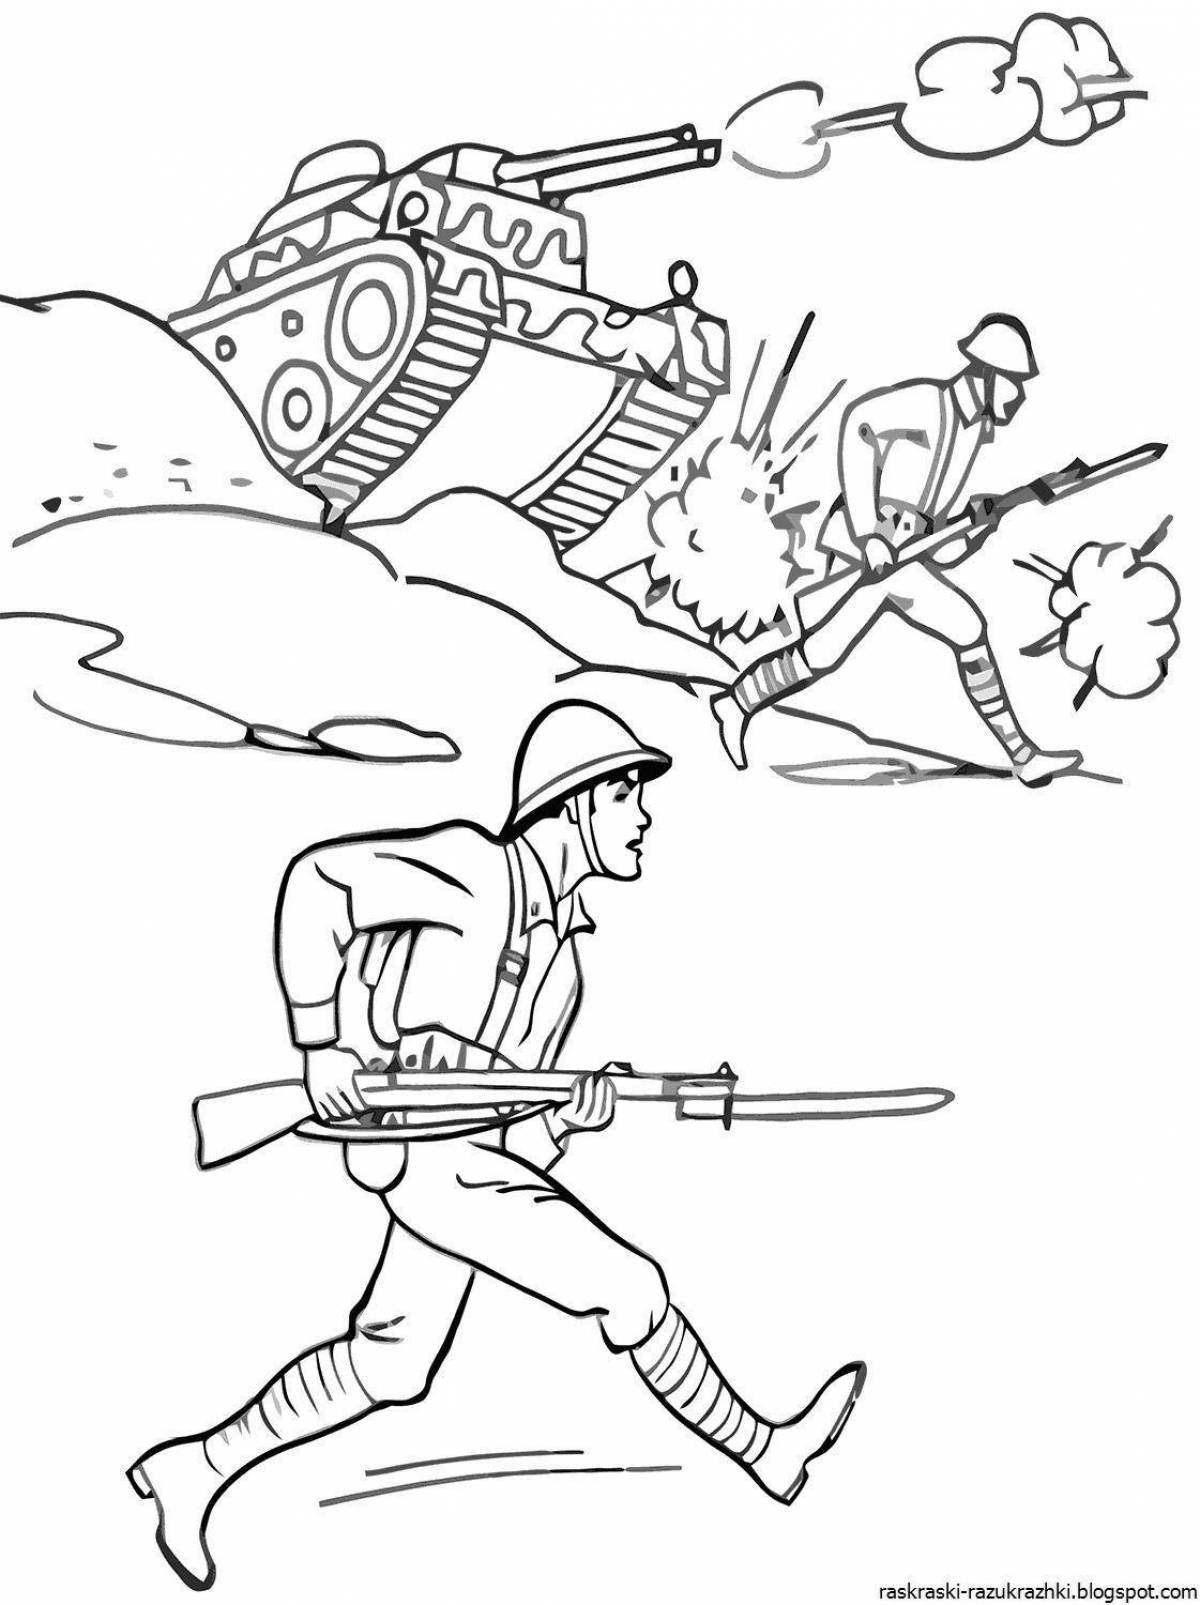 Coloring Pages February 2 Battle of Stalingrad (28 pcs) - download or ...